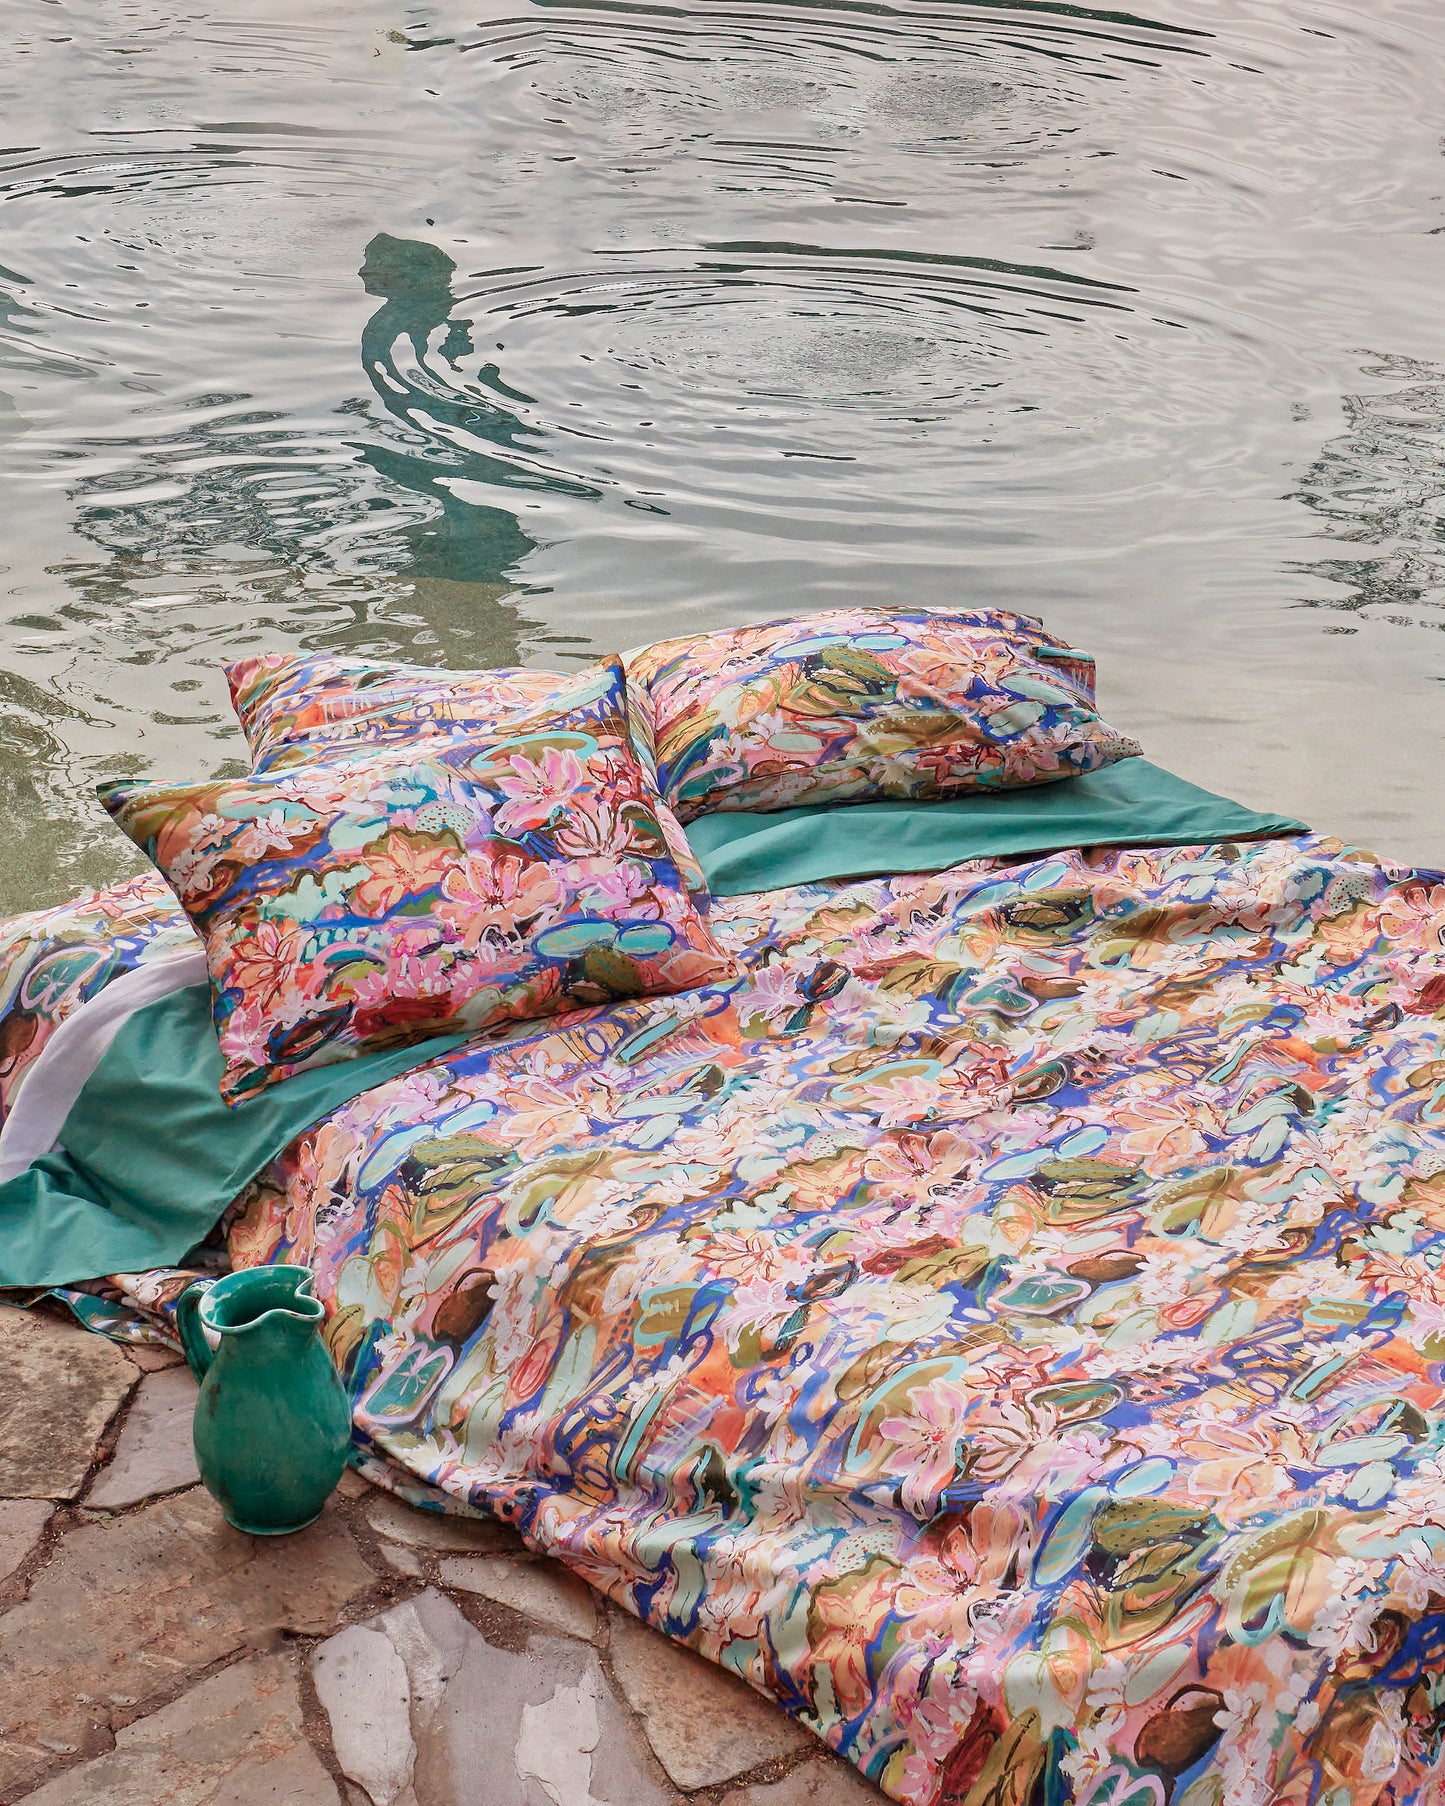  The Kip&Co x Kezz Brett Waterlily Waterway Organic Cotton Quilt Cover features a stunning painterly scene of water lilies and other pond blooming plants with layers of superb details in a spectrum of cool tone colours with plain green reverse.